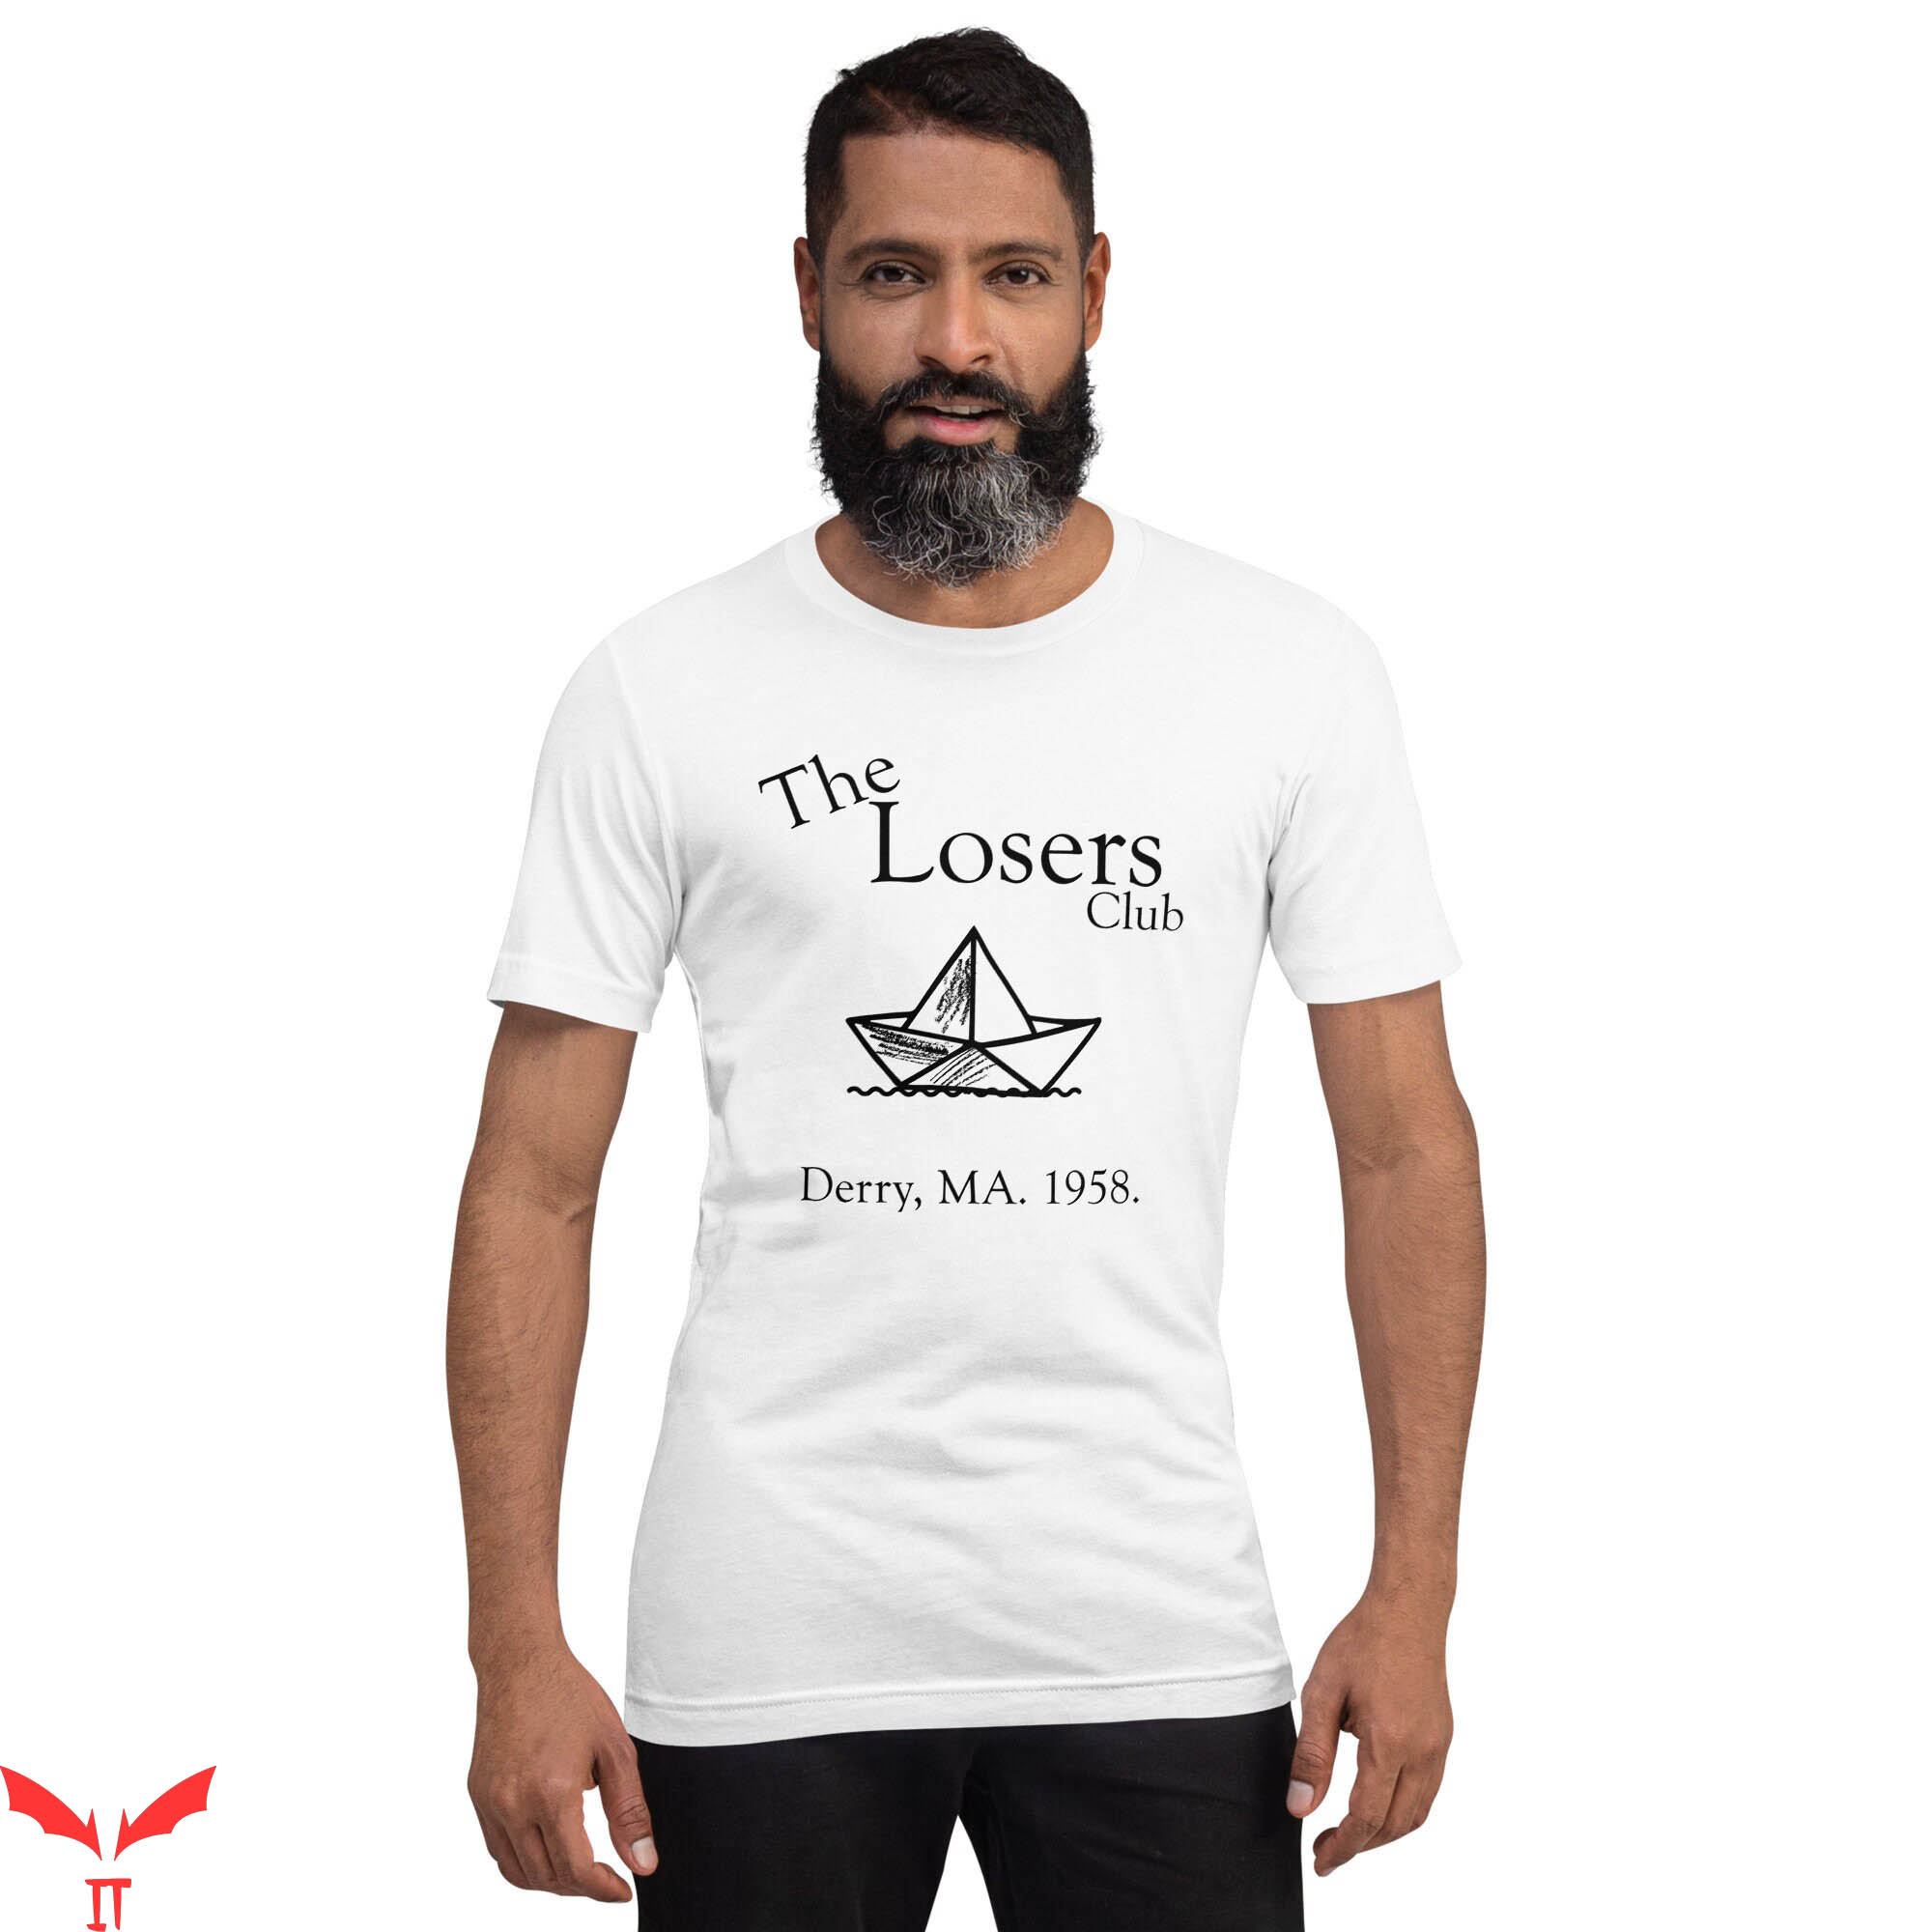 IT Chapter 2 T-Shirt The Losers Club Derry, MA. 1958 Movie